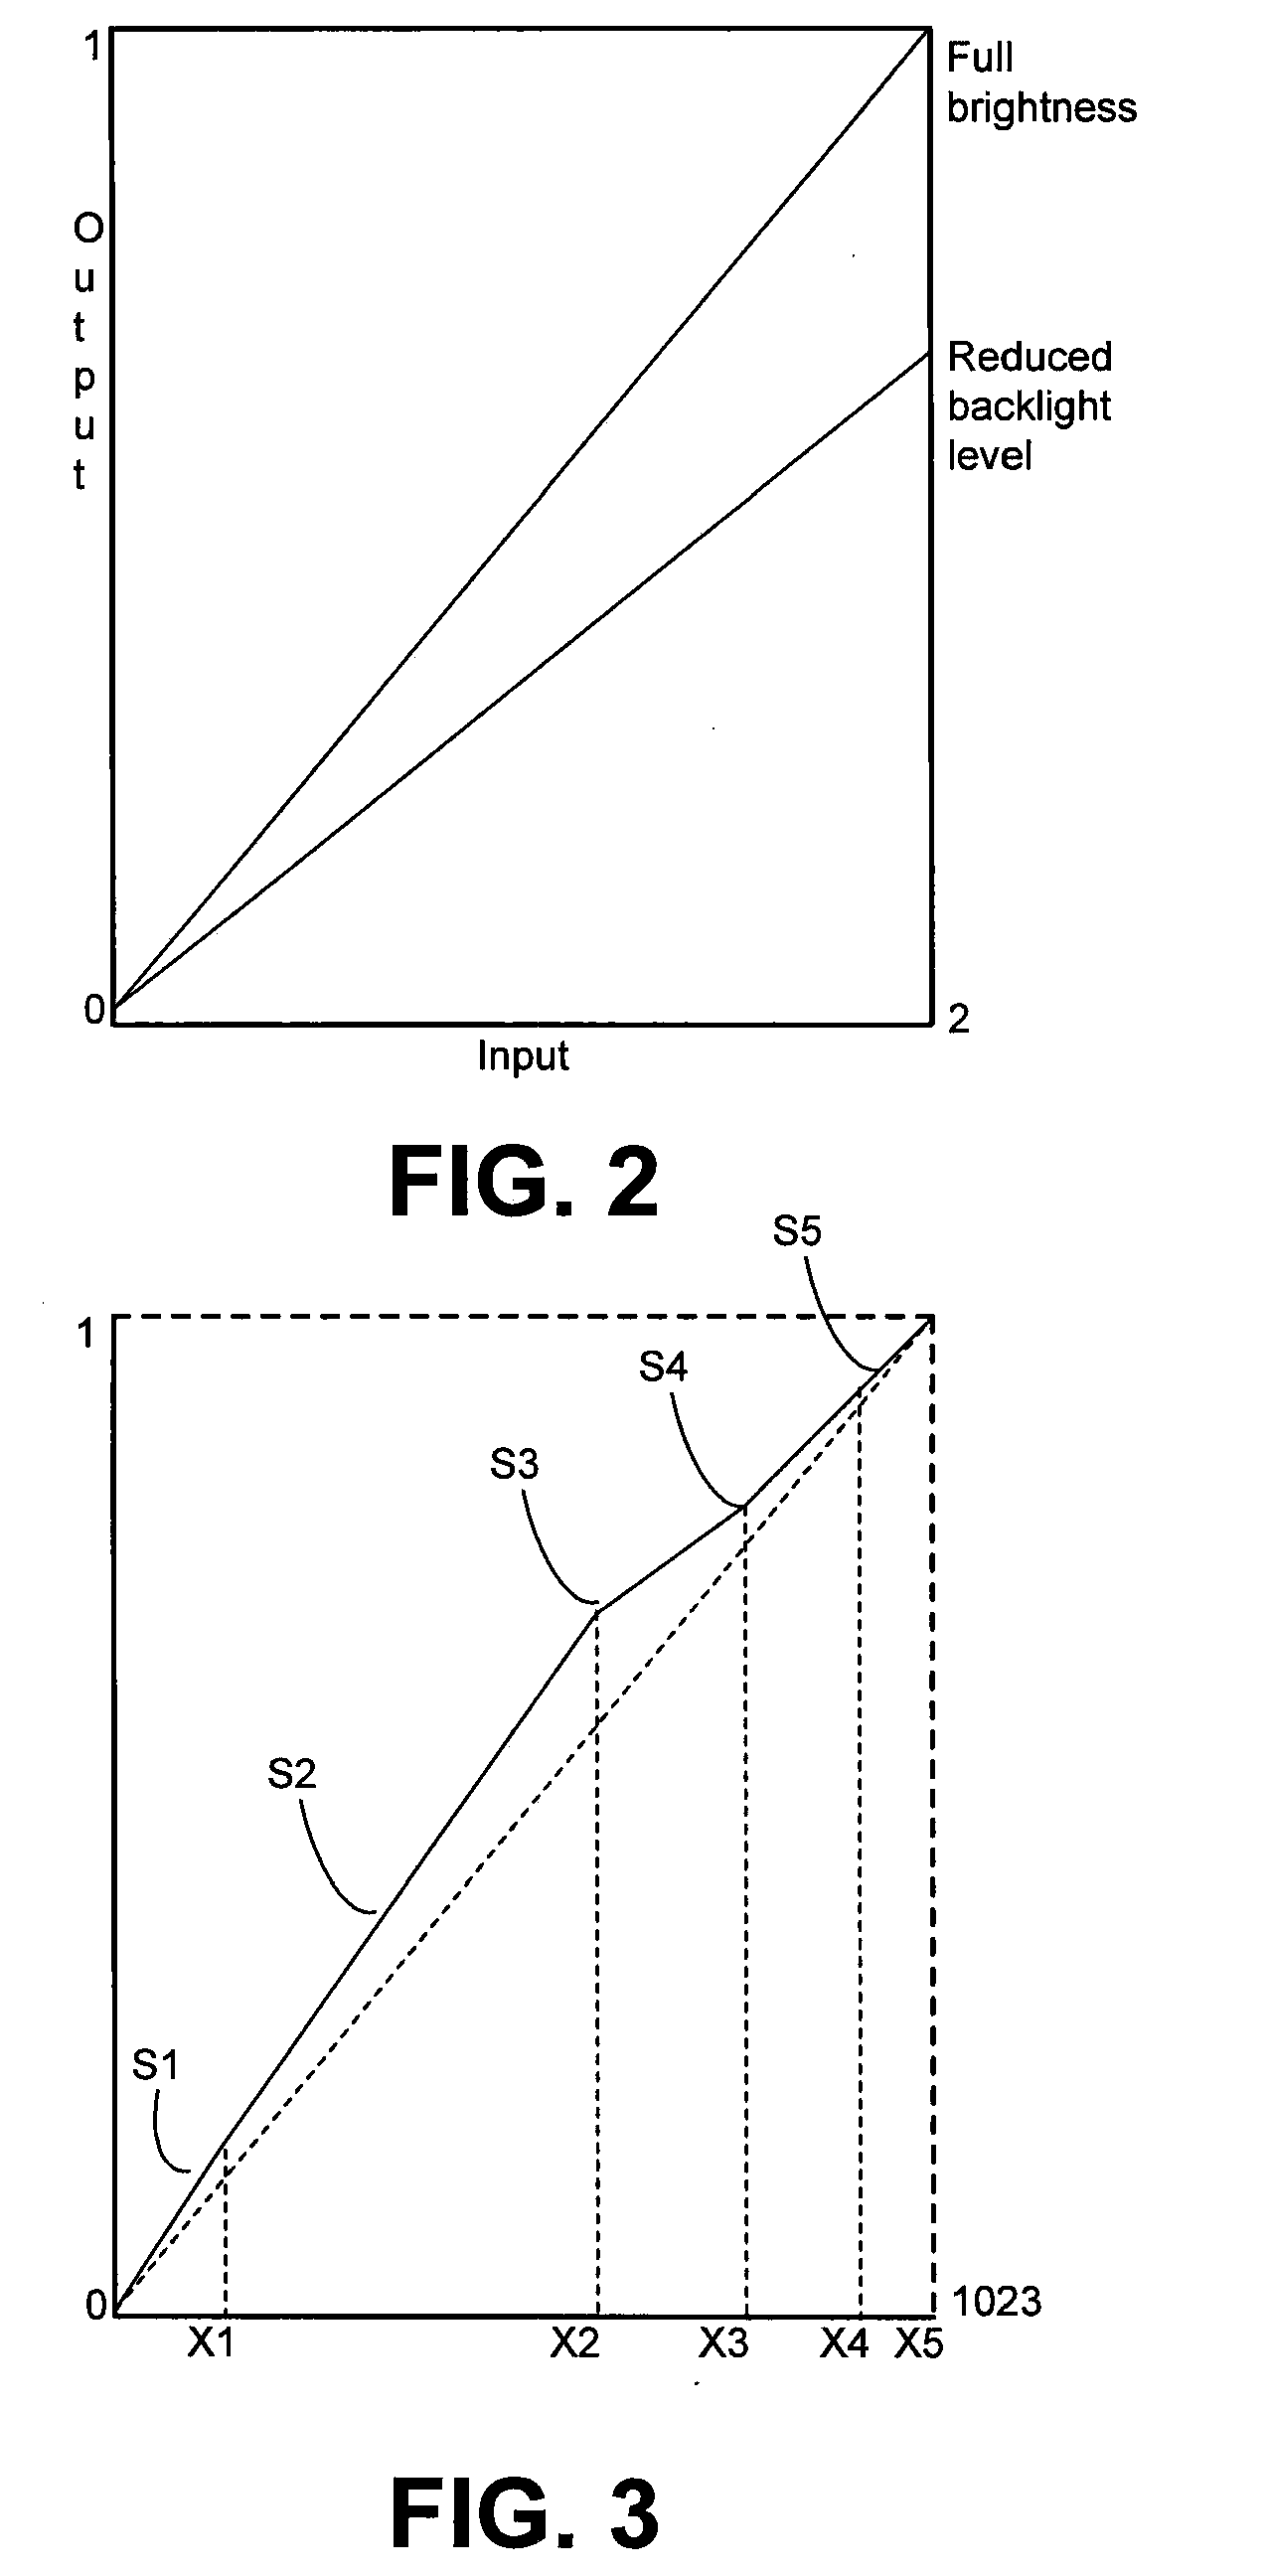 System and Method for Providing Control Data for Dynamically Adjusting Lighting and Adjusting Video Pixel Data for a Display to Substantially Maintain Image Display Quality While Reducing Power Consumption